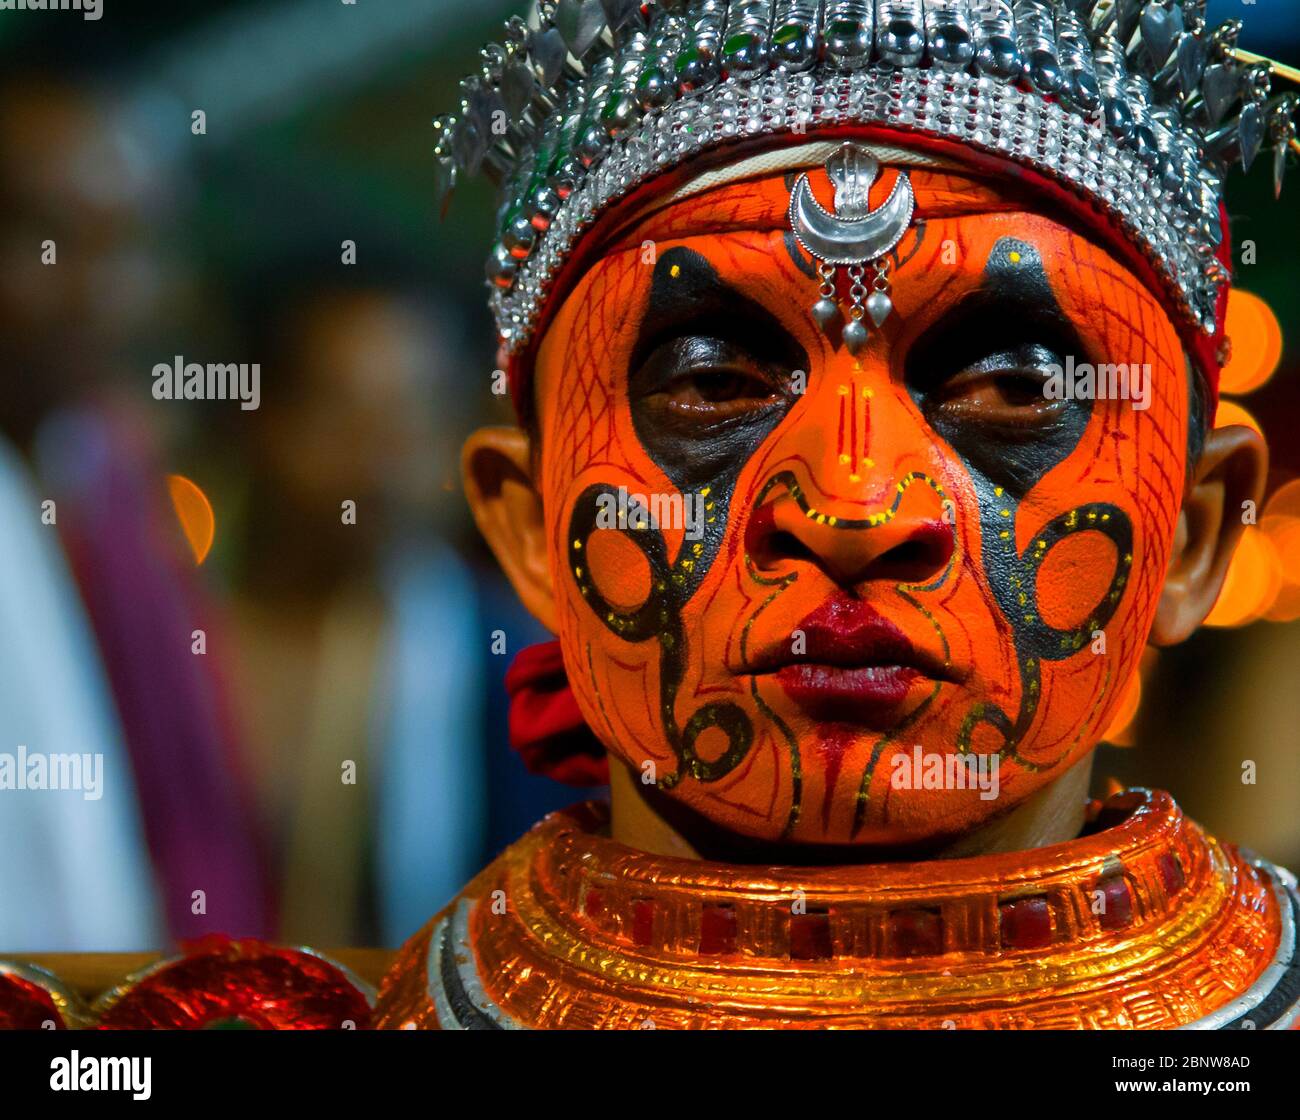 Nagakaali Theyyam | Ritual Art Form of Kerala, Thirra or Theyyam thira is a ritual dance performed in 'Kaavu'(grove)& temples of the Kerala, India Stock Photo